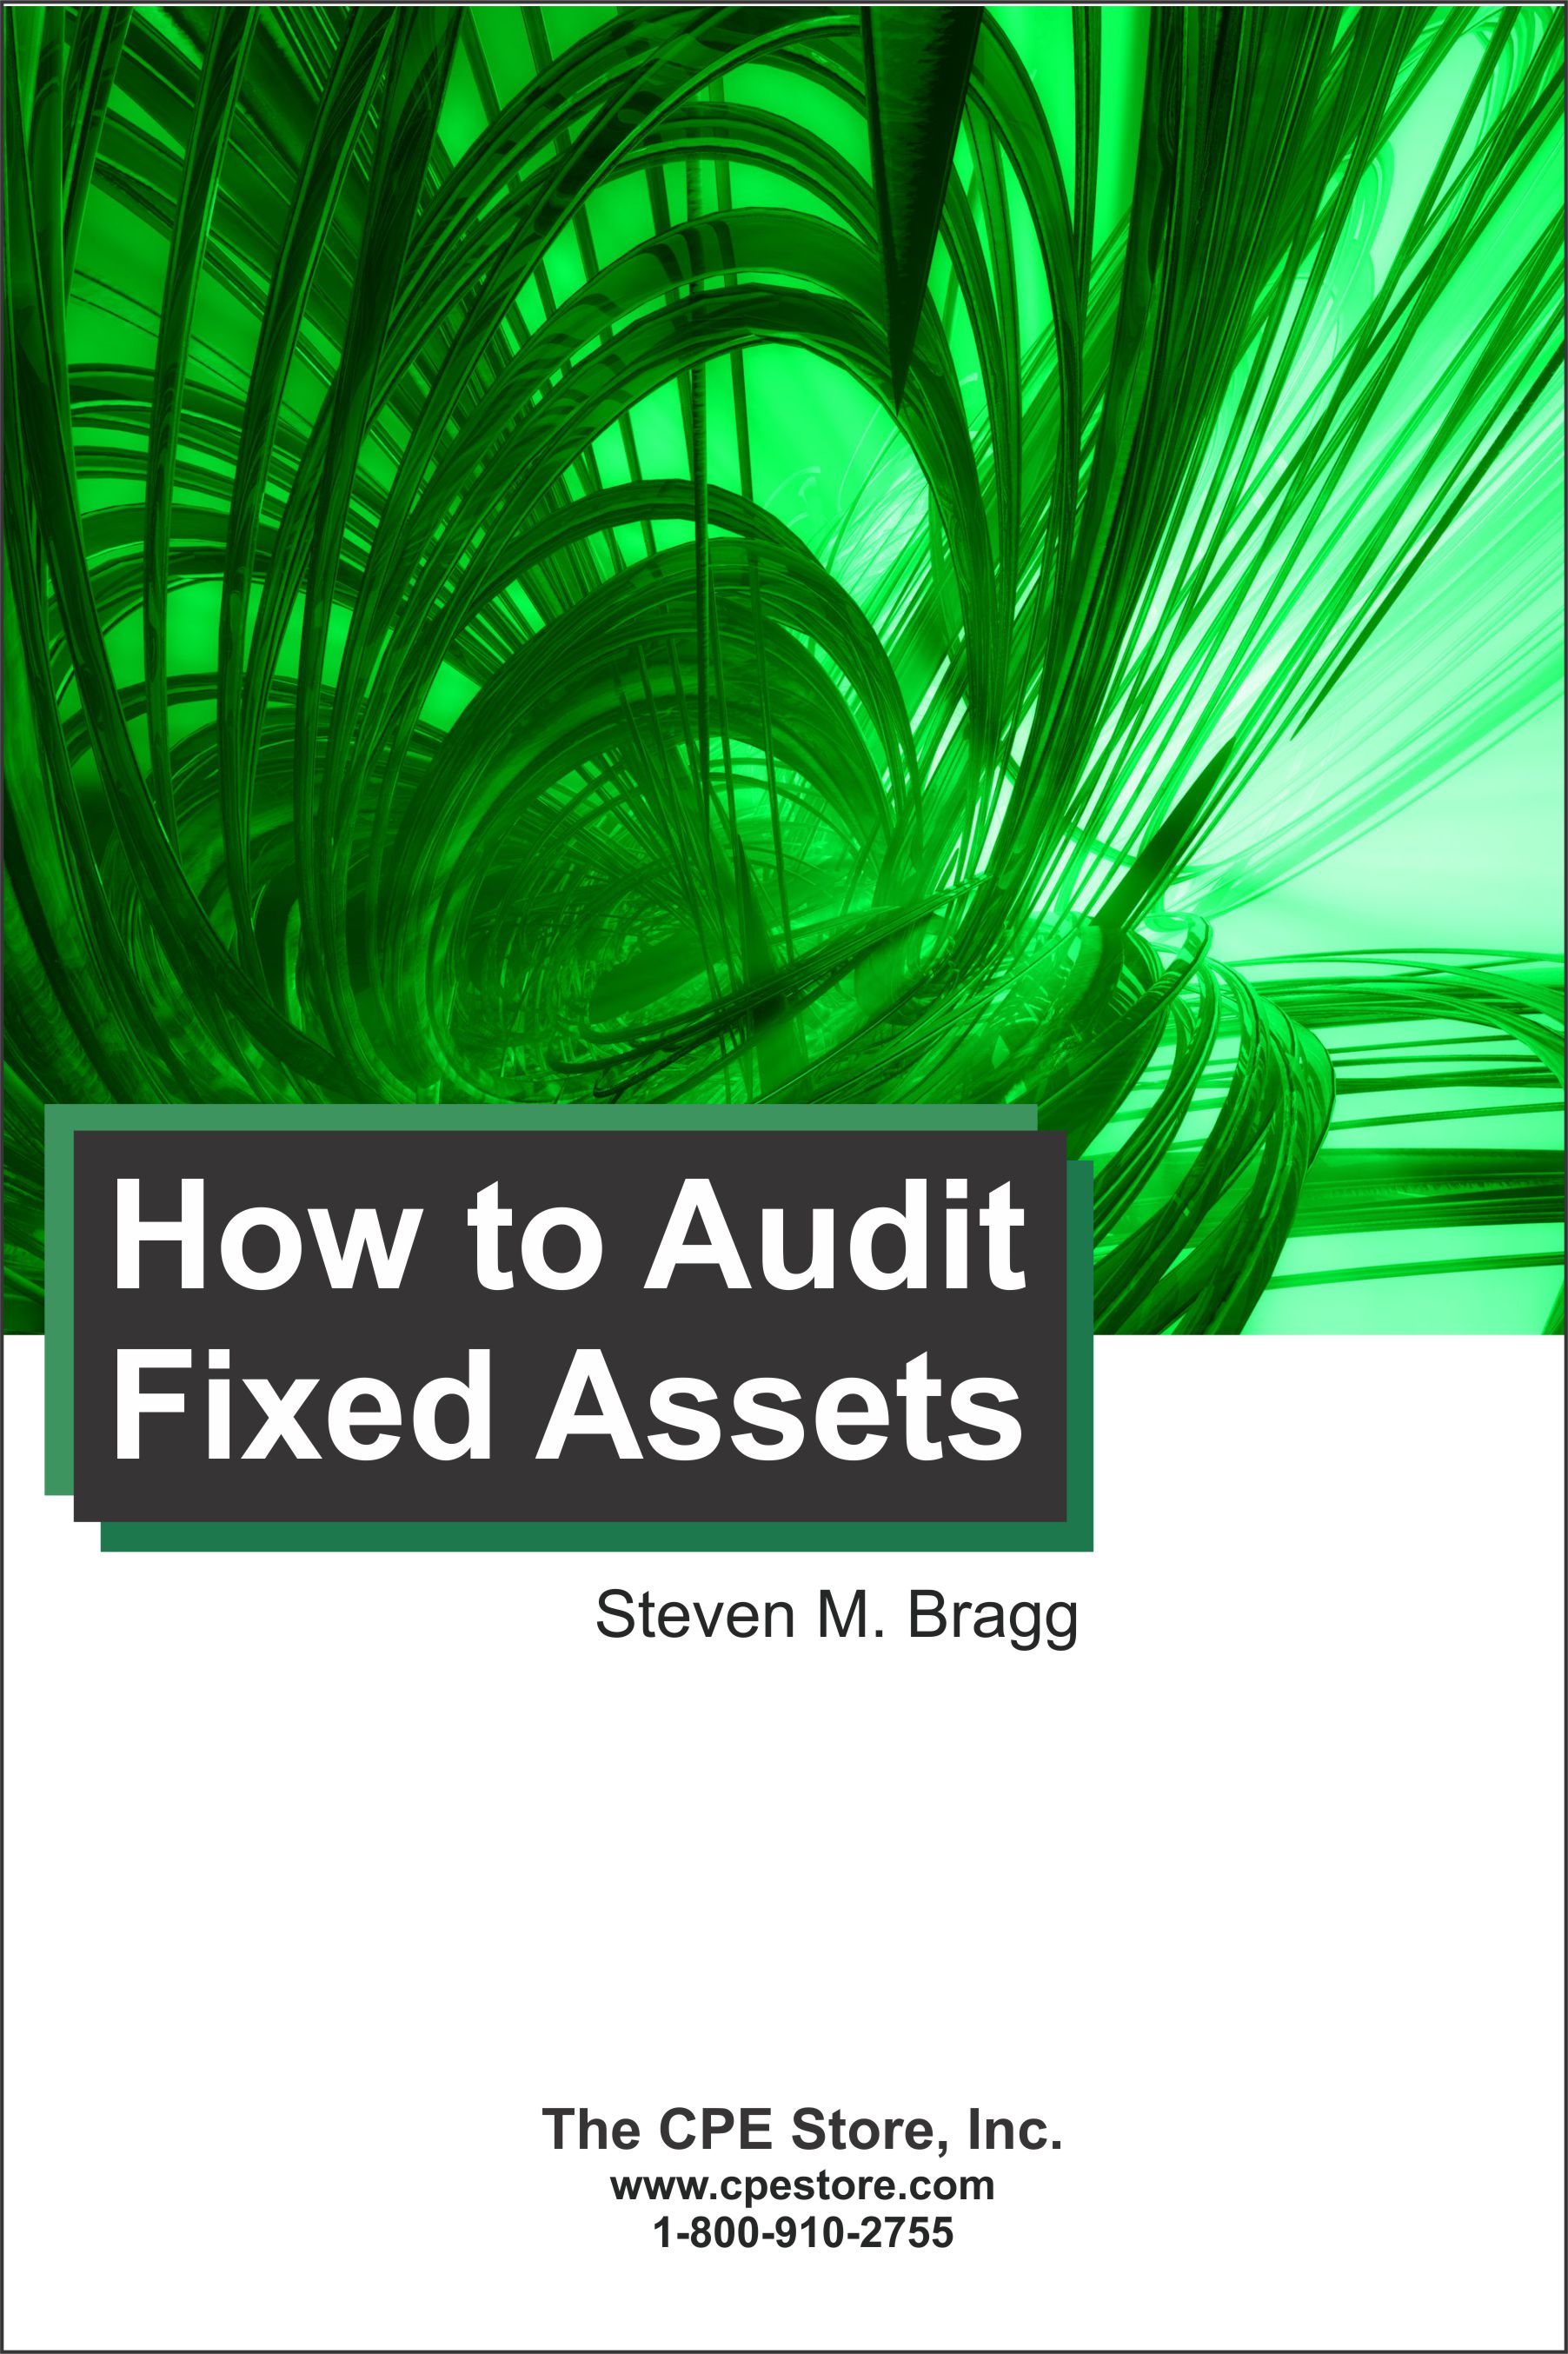 How to Audit Fixed Assets